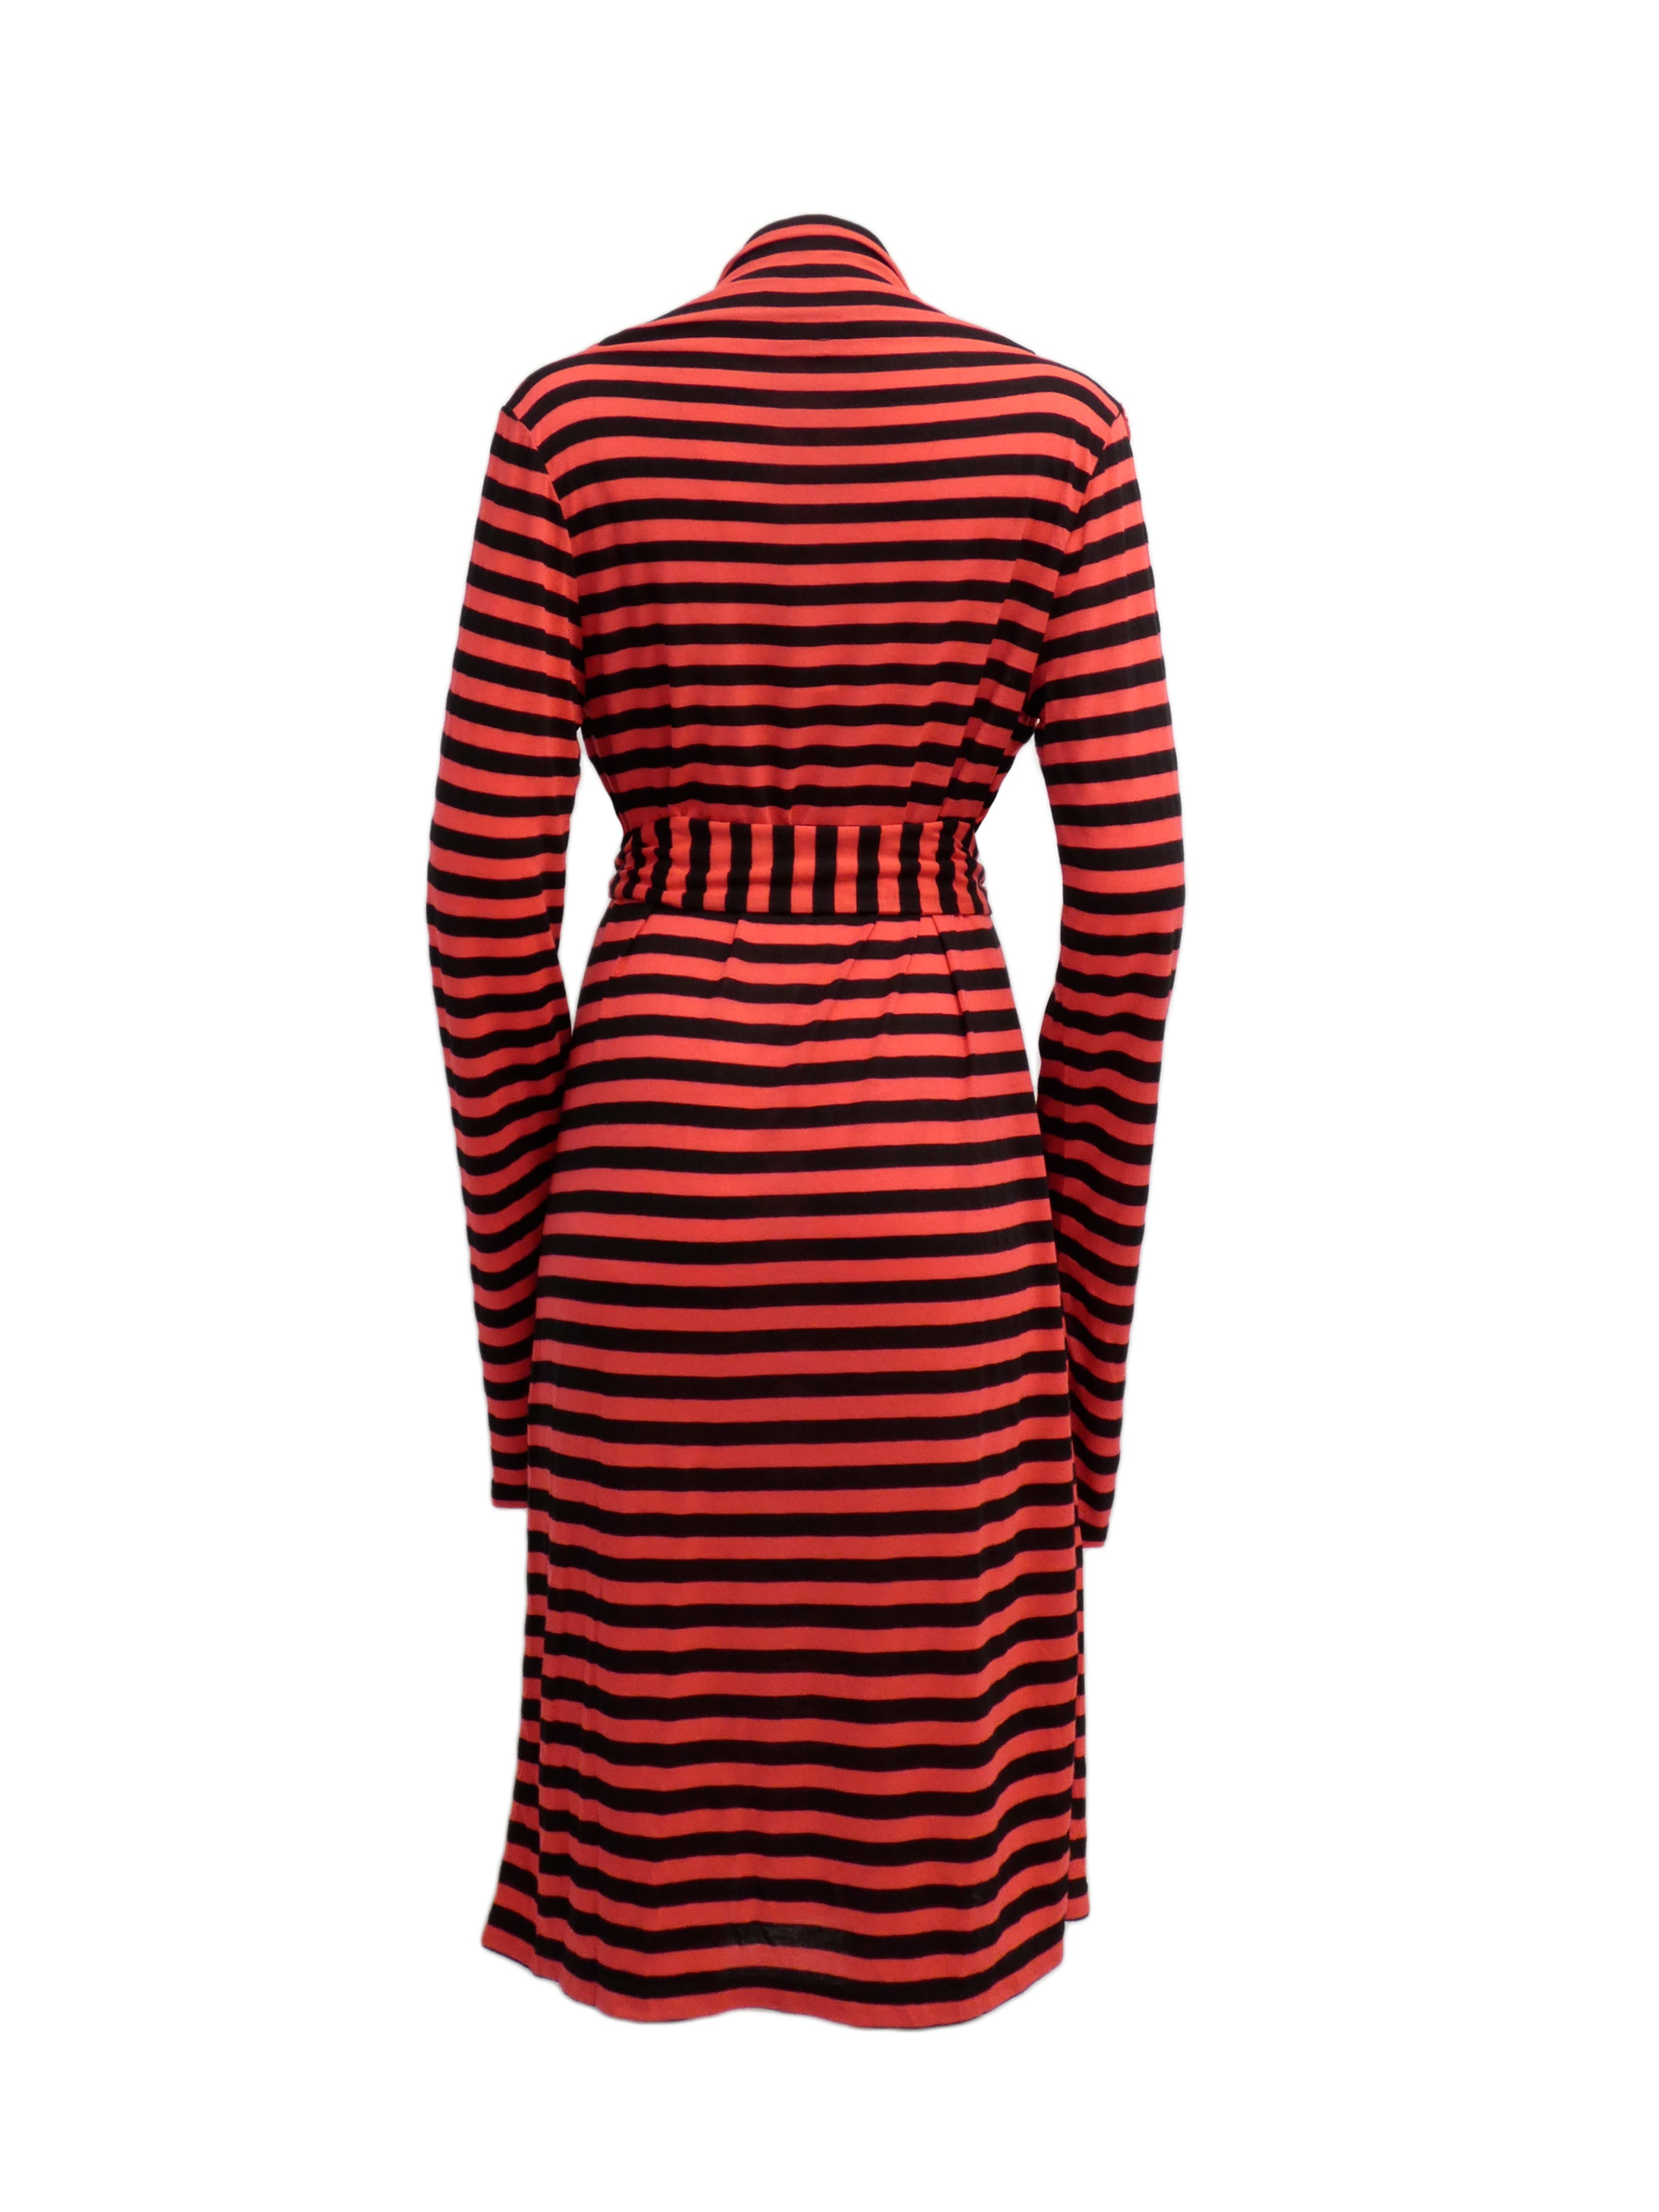 BLACK AND RED STRIPED DRESS